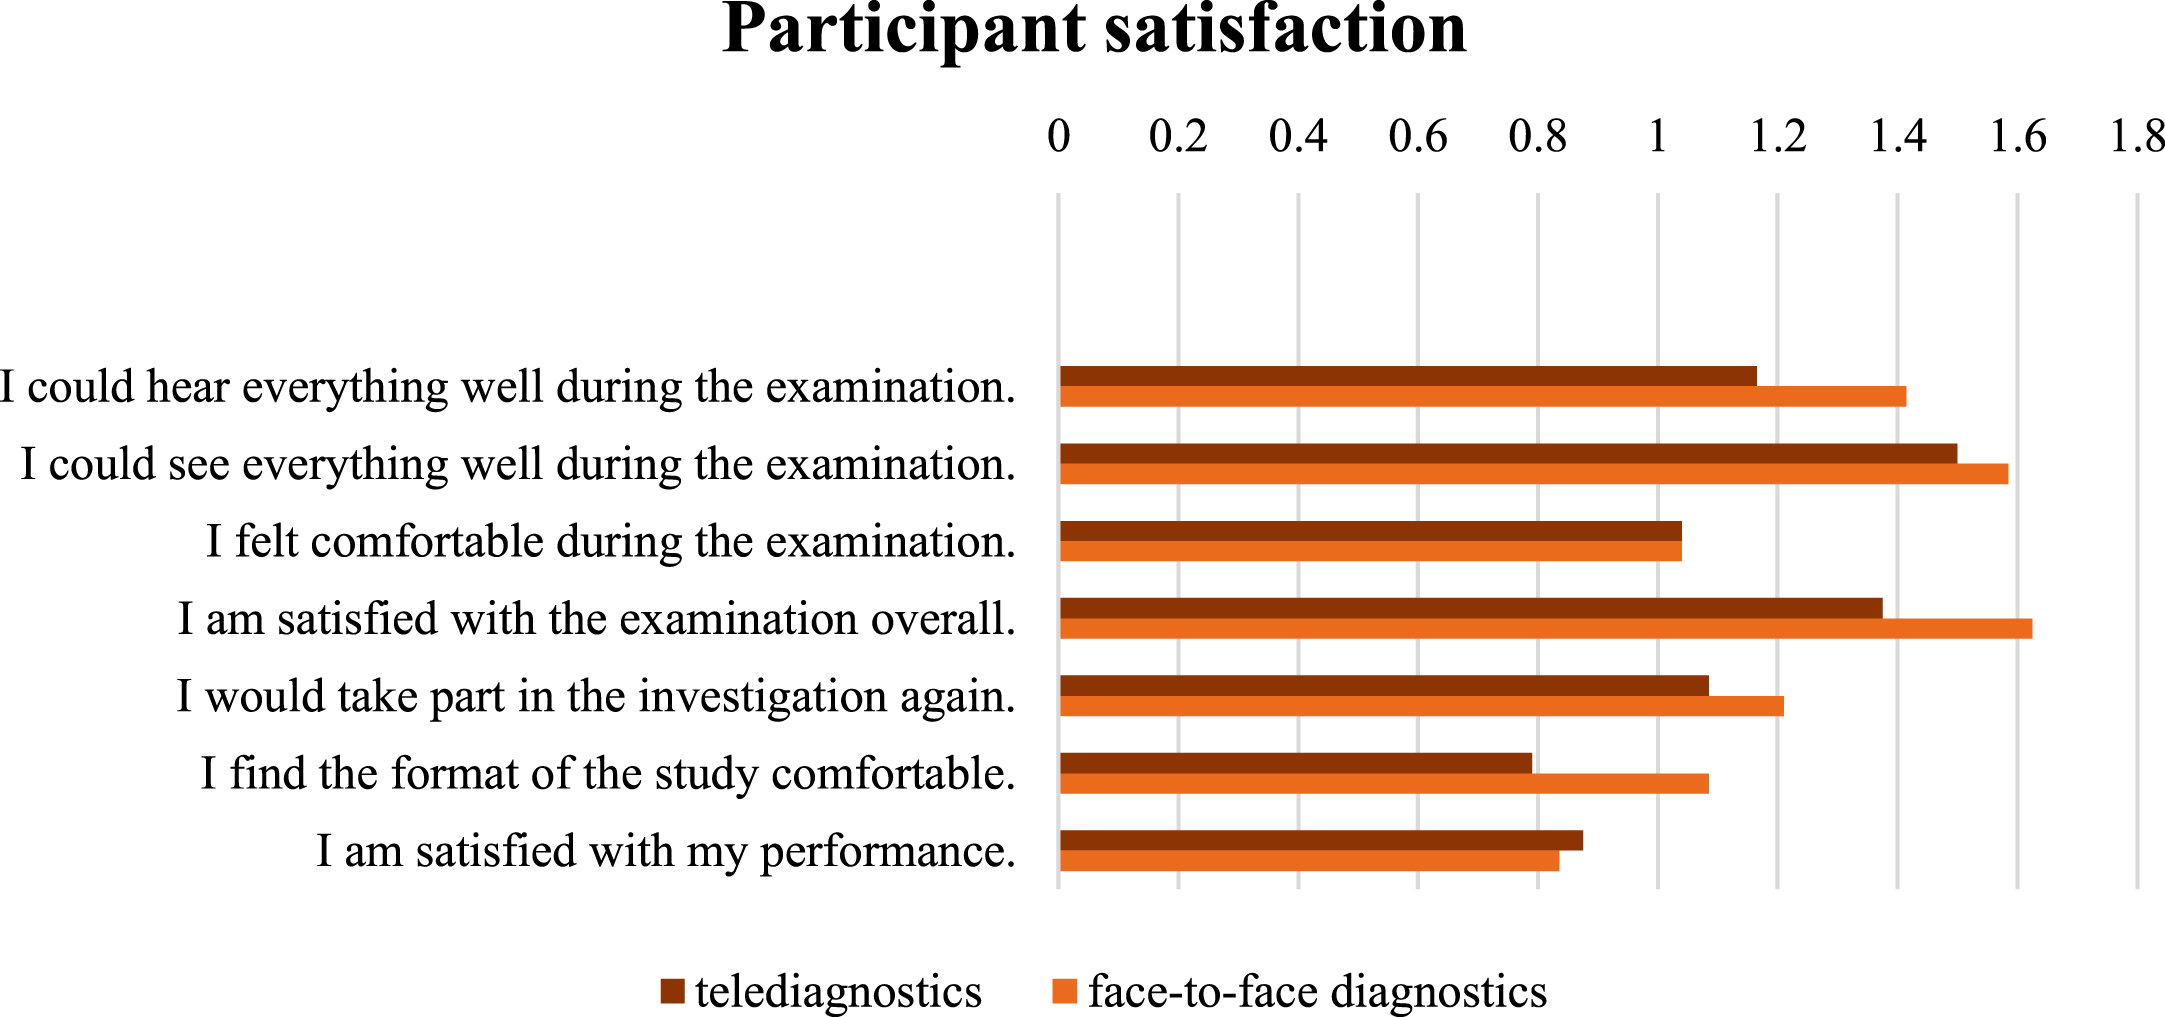 Participant satisfaction with telediagnostic (red) and face-to-face (orange) setting.